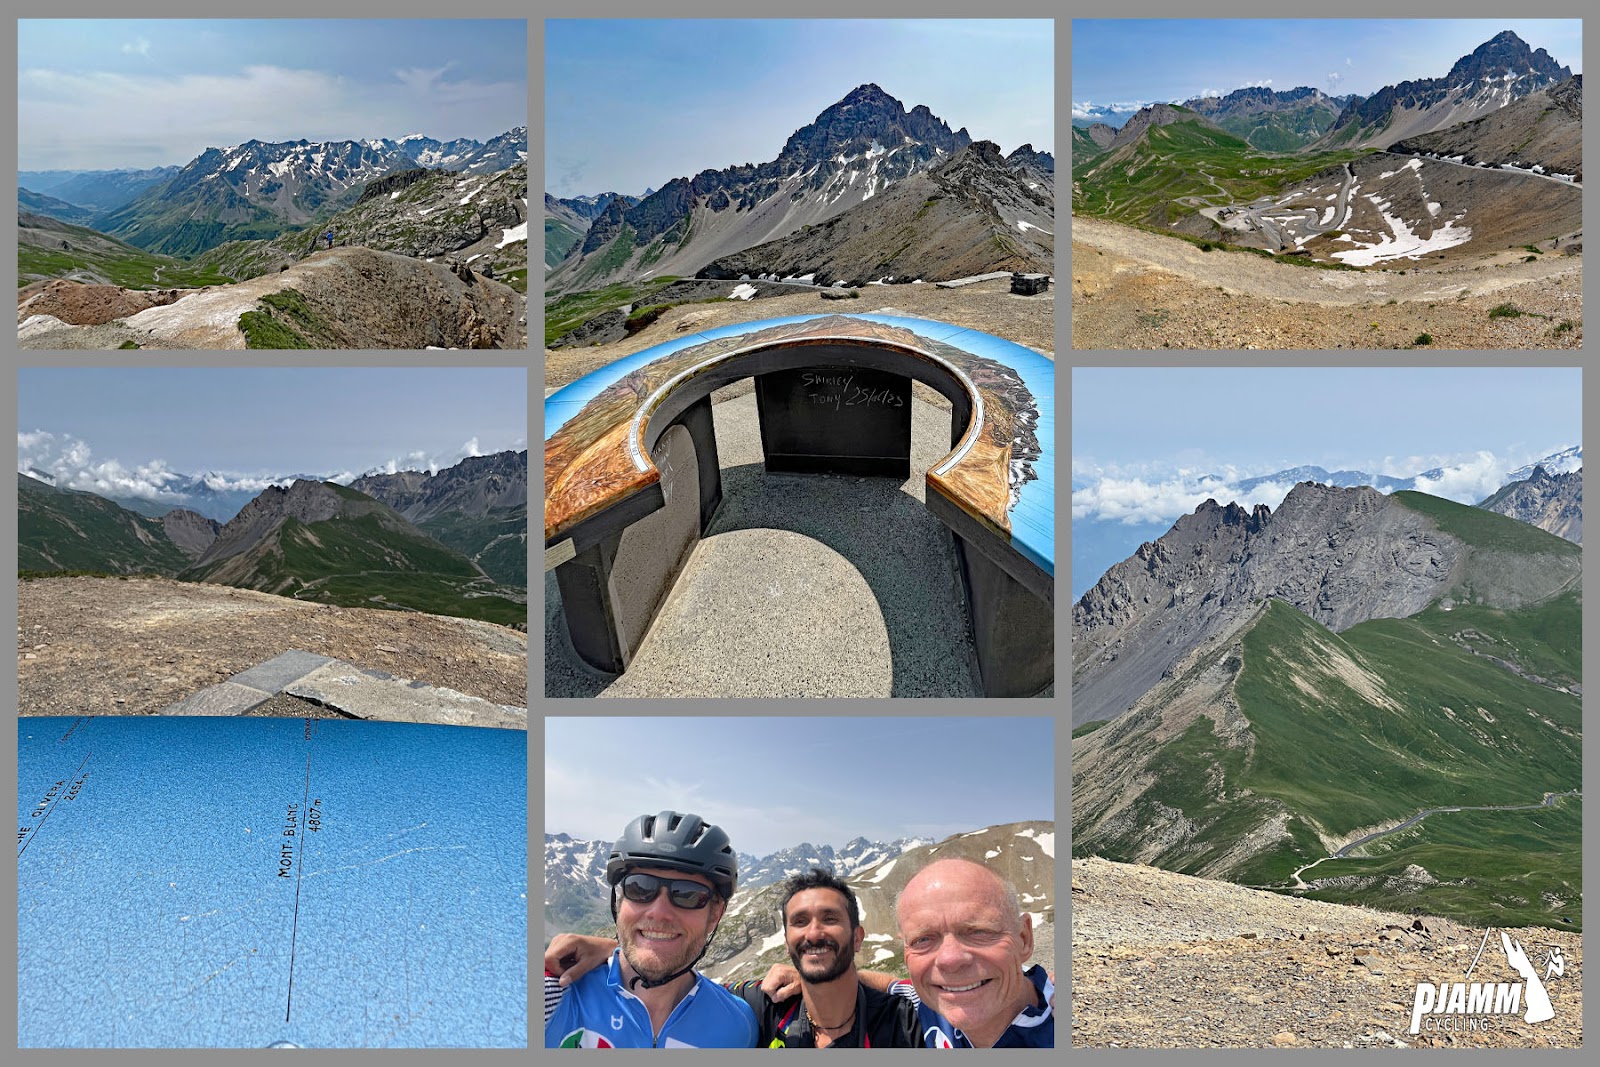 Cycling Col du Galibier from Valloire: photo collage shows lookout point and vista views just passed climb finish